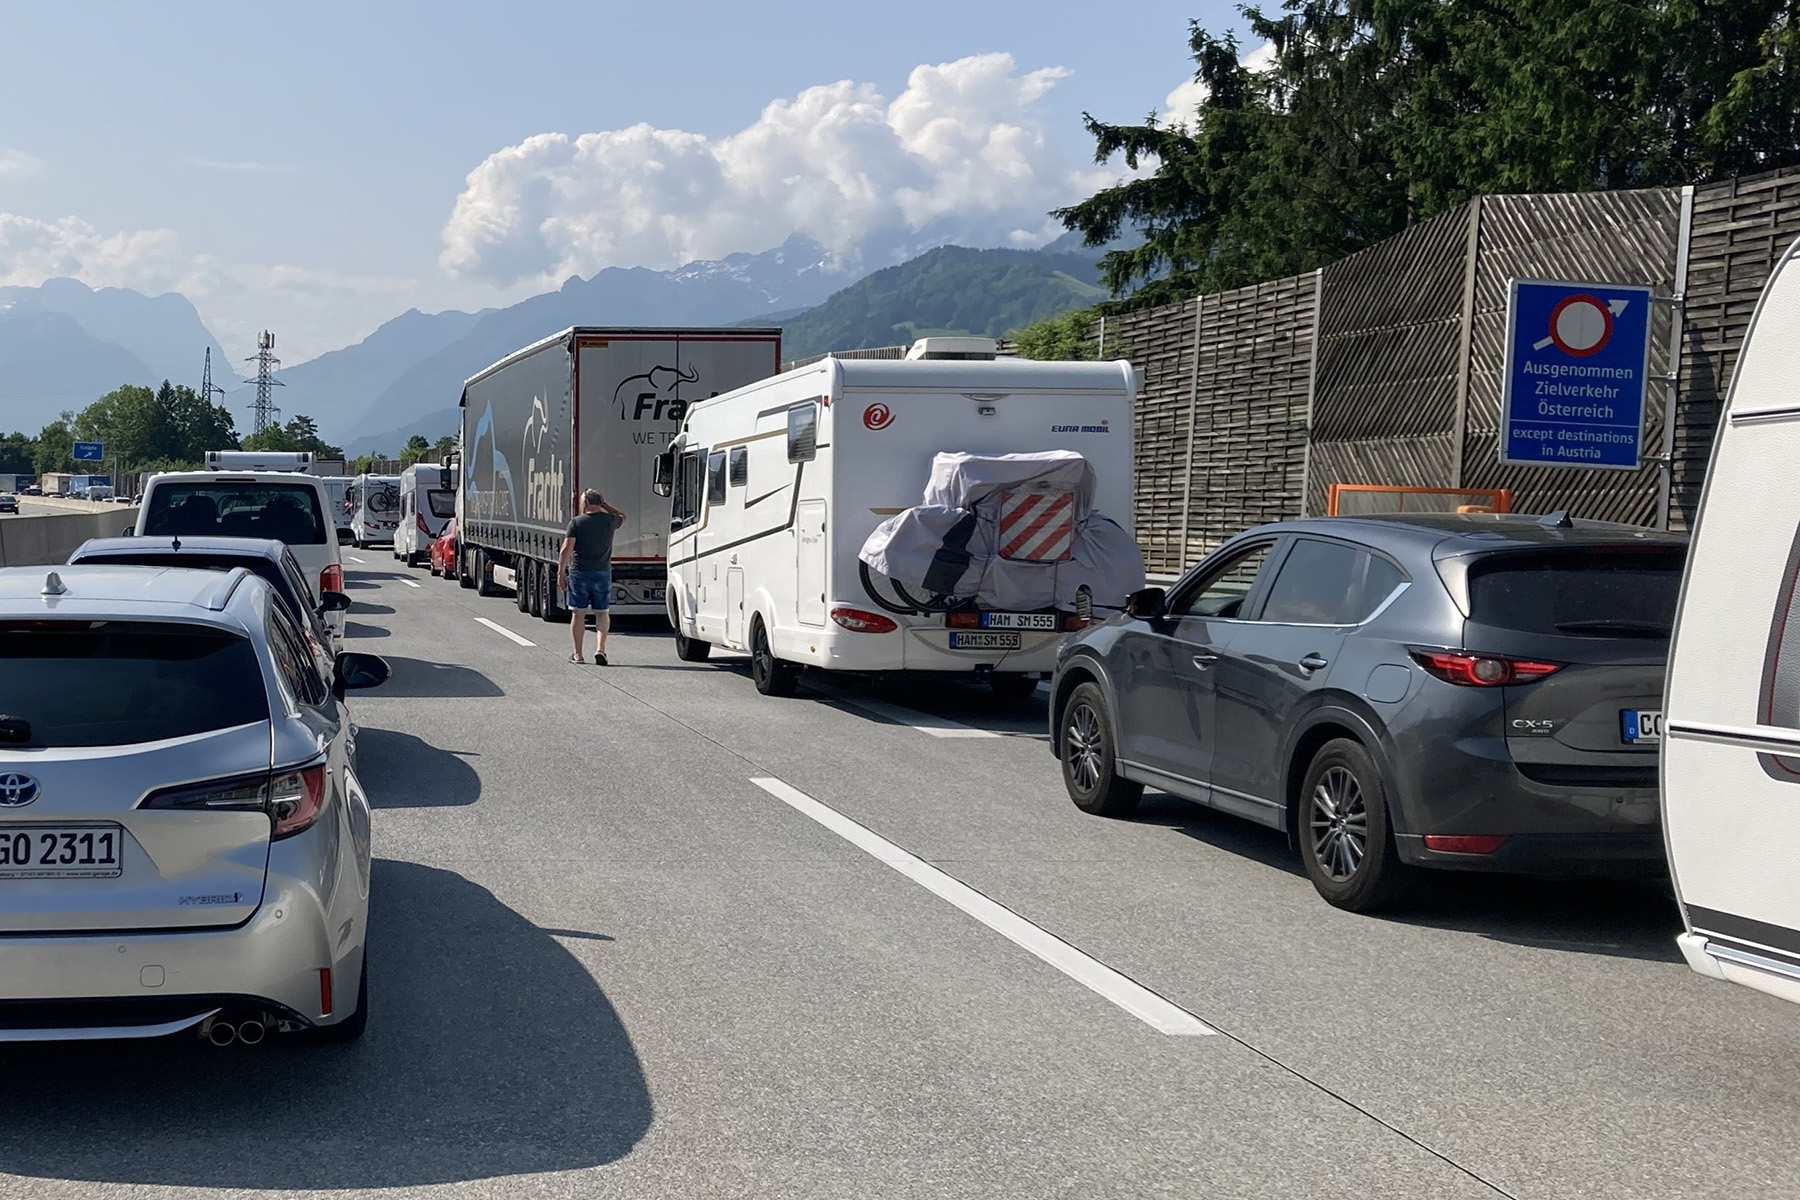 Traffic jam with holidaymakers on the A10 Tauern freeway near Hallein in Austria